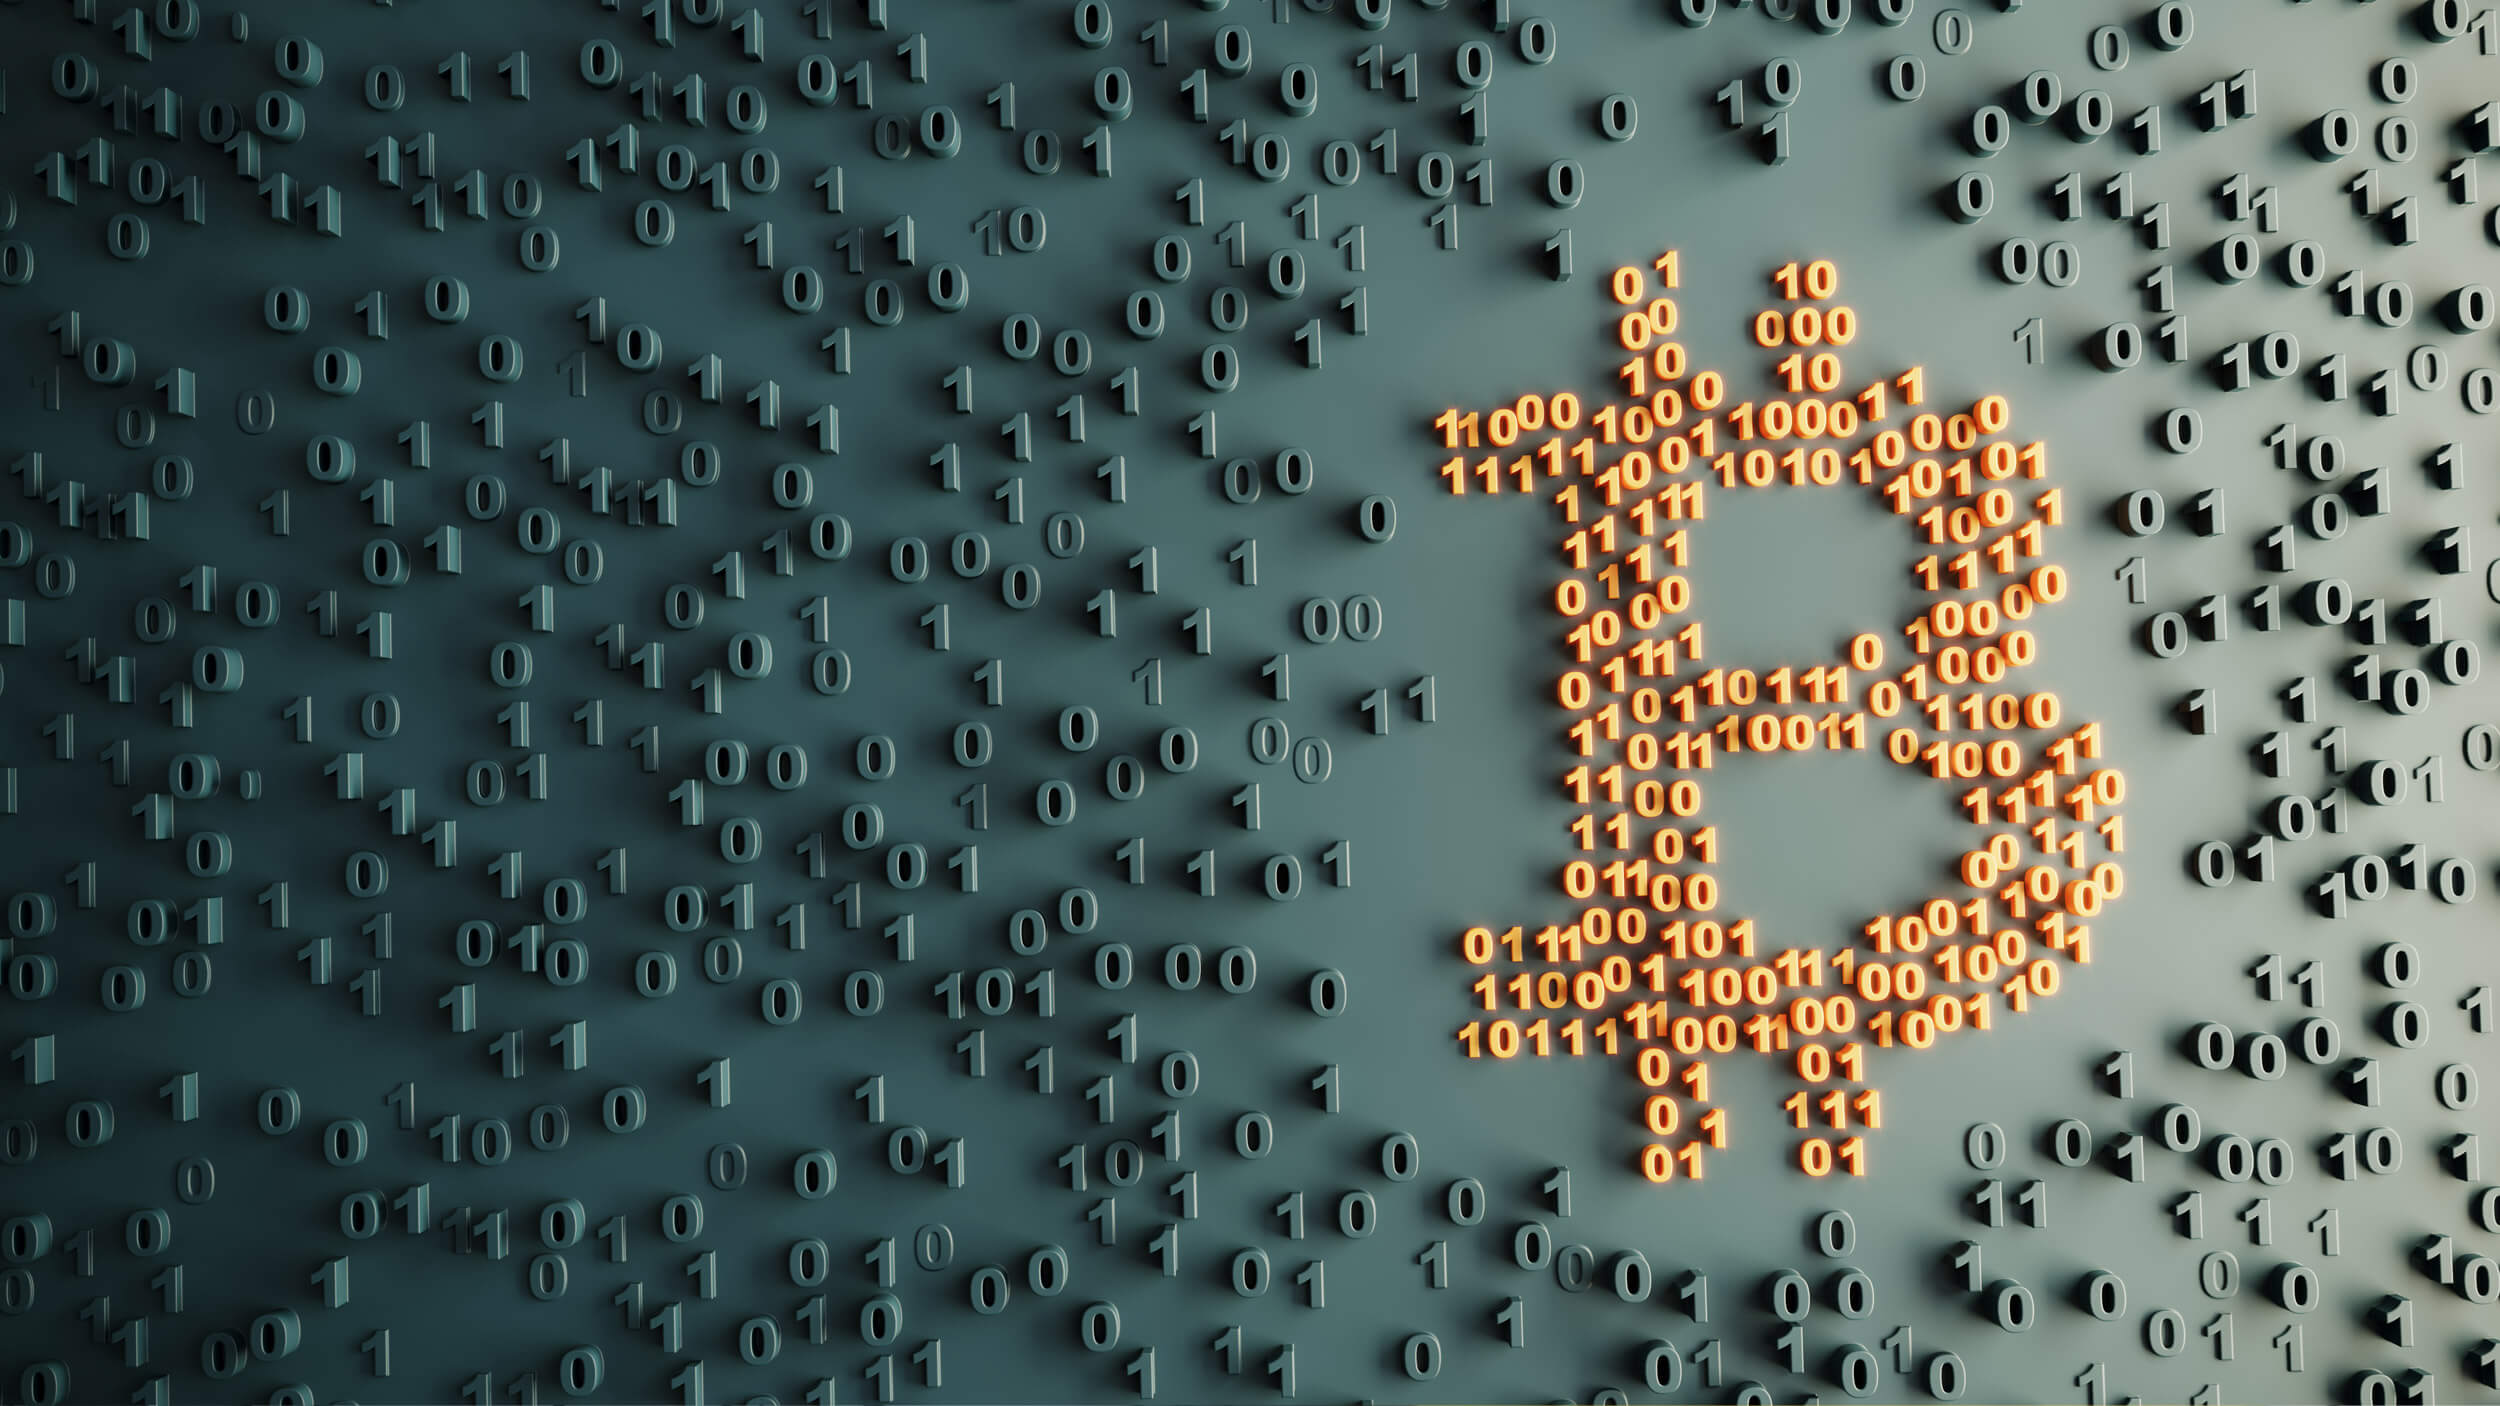 Can The Maximum Number of Bitcoins Be Changed?